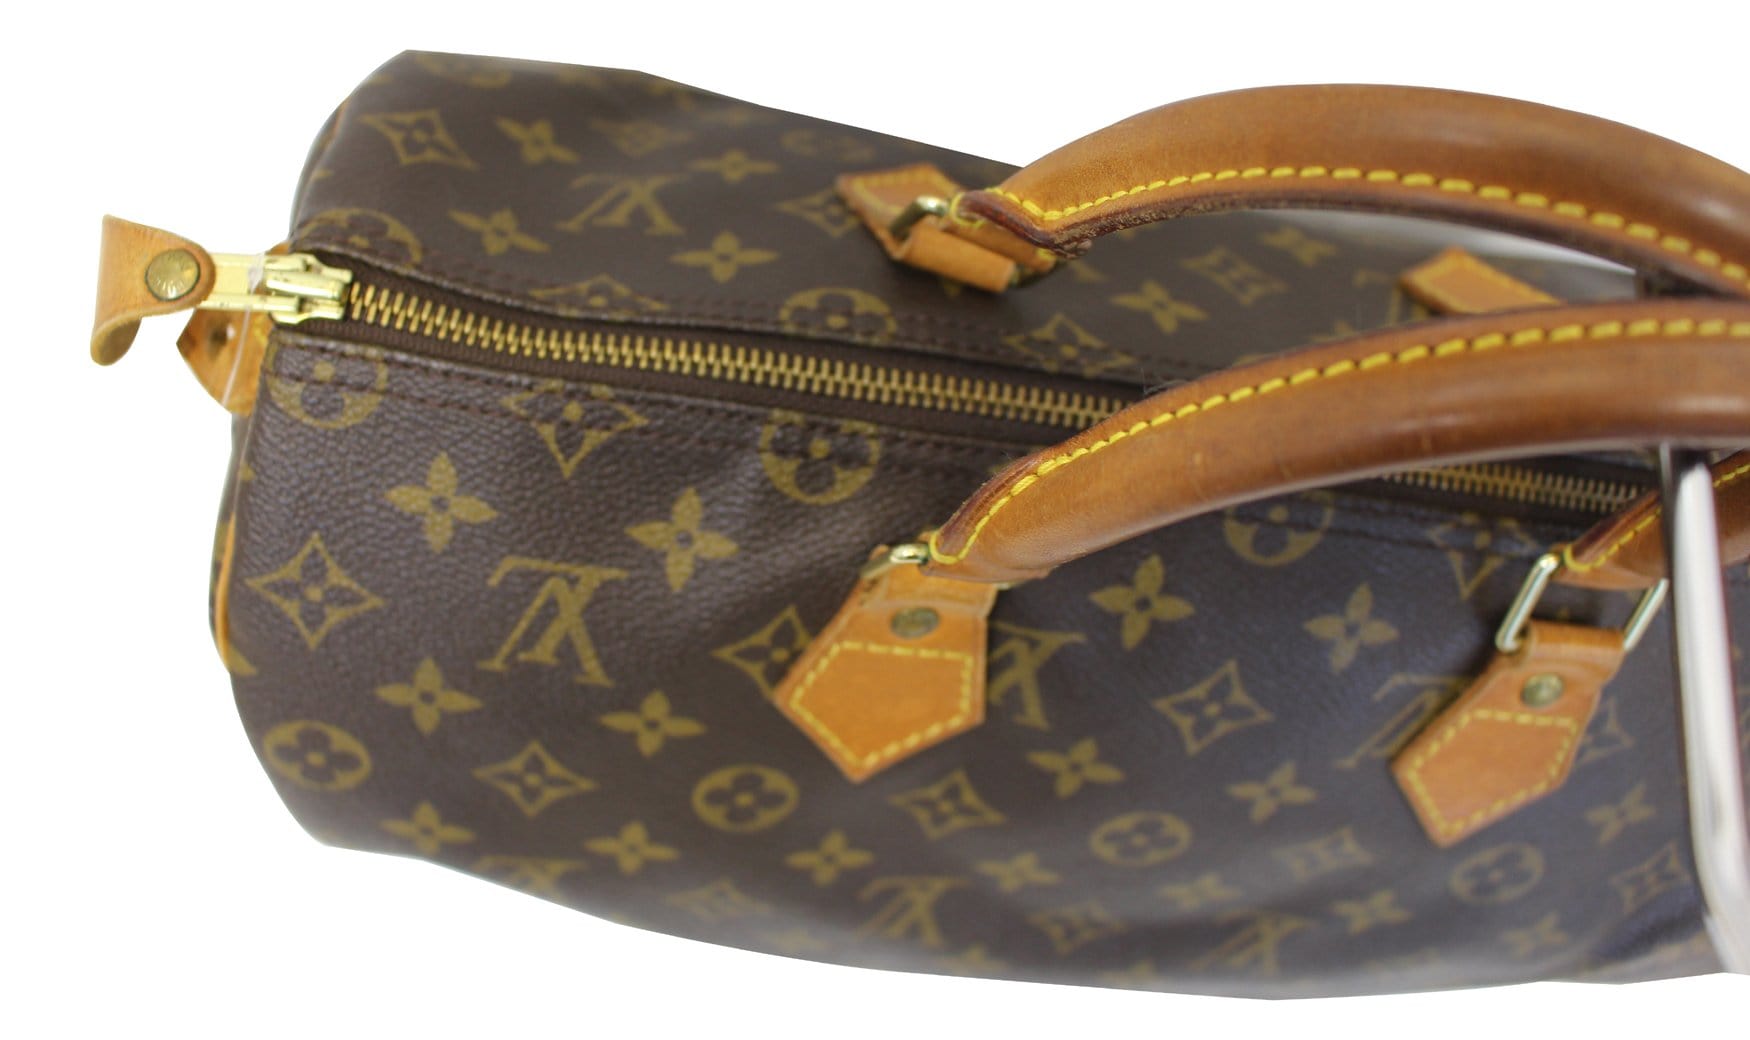 Louis Vuitton Louis Vuitton Monogram My Lv Heritage Speedy Bandouliere 35  Shoulder Bag Added Insert Preowned on SALE